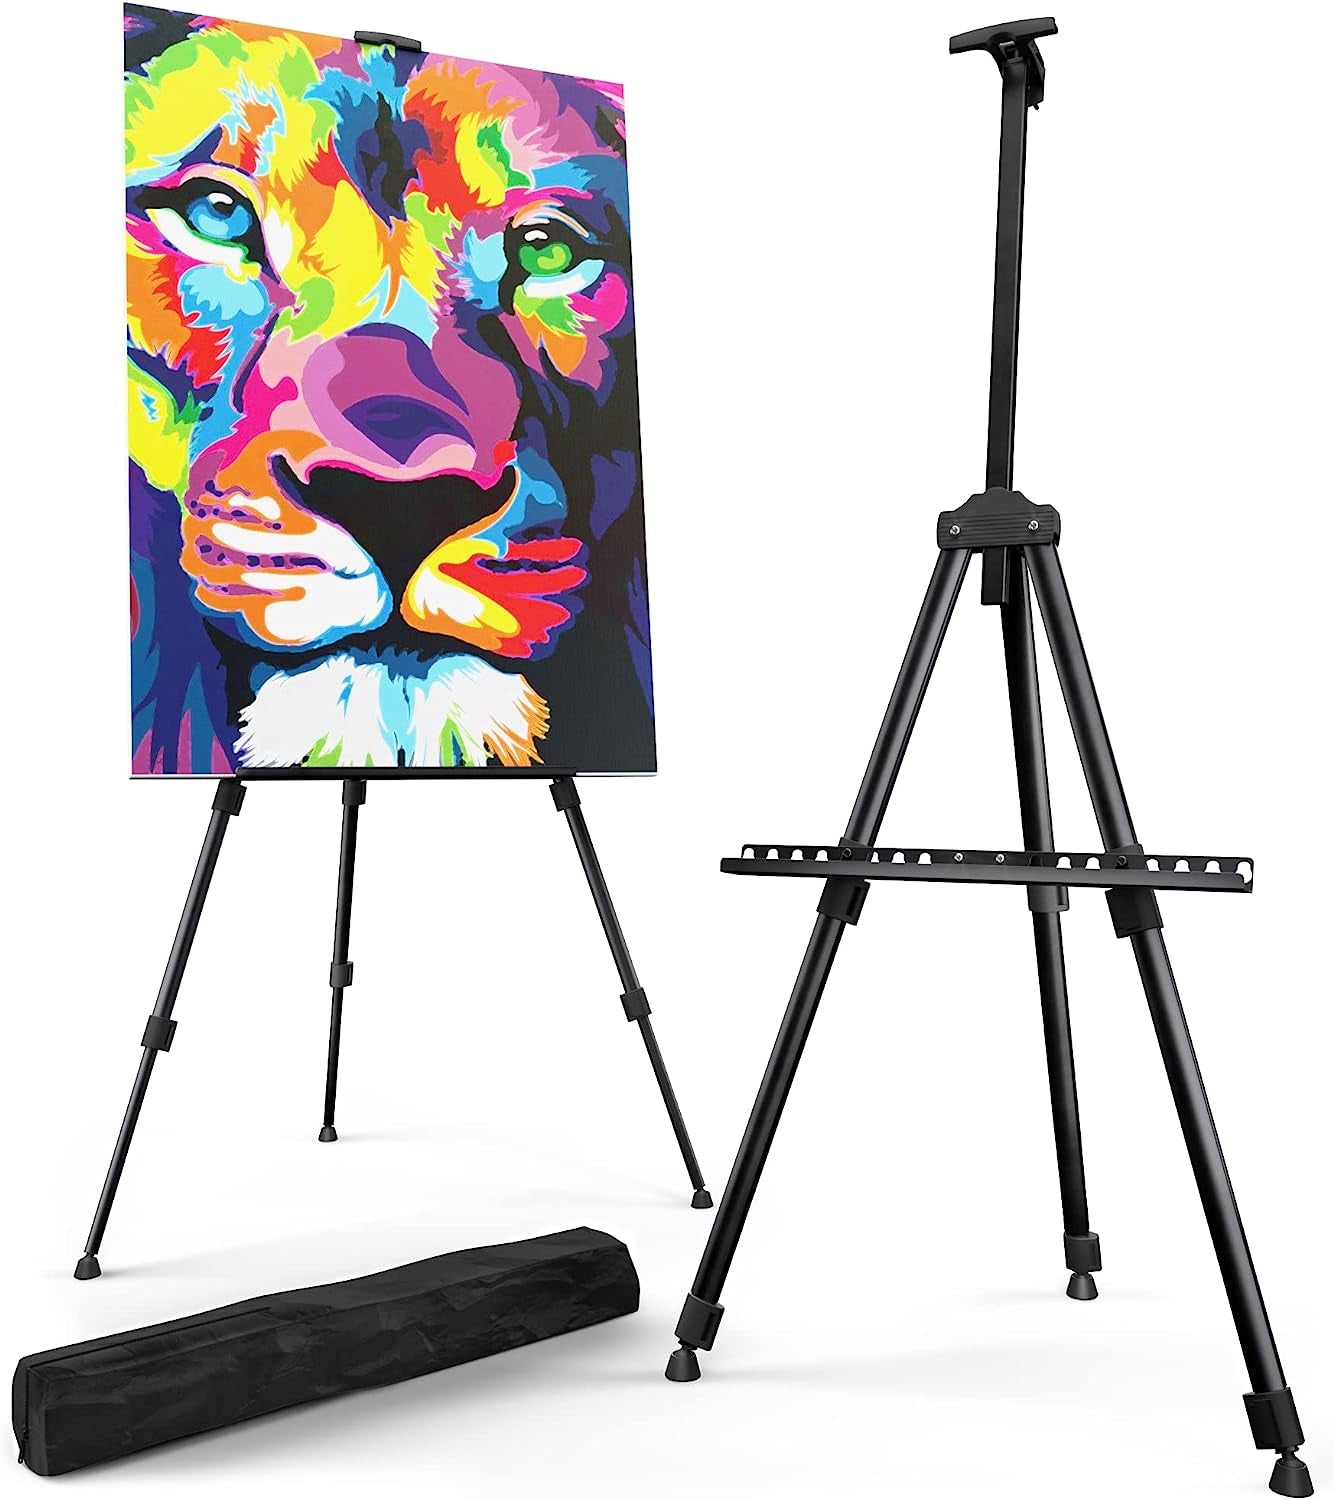 T-Sign Portable Artist Easel Stand - Adjustable Height Painting Easel with Bag - Table Top Art Drawing Easels for Painting Canvas, W